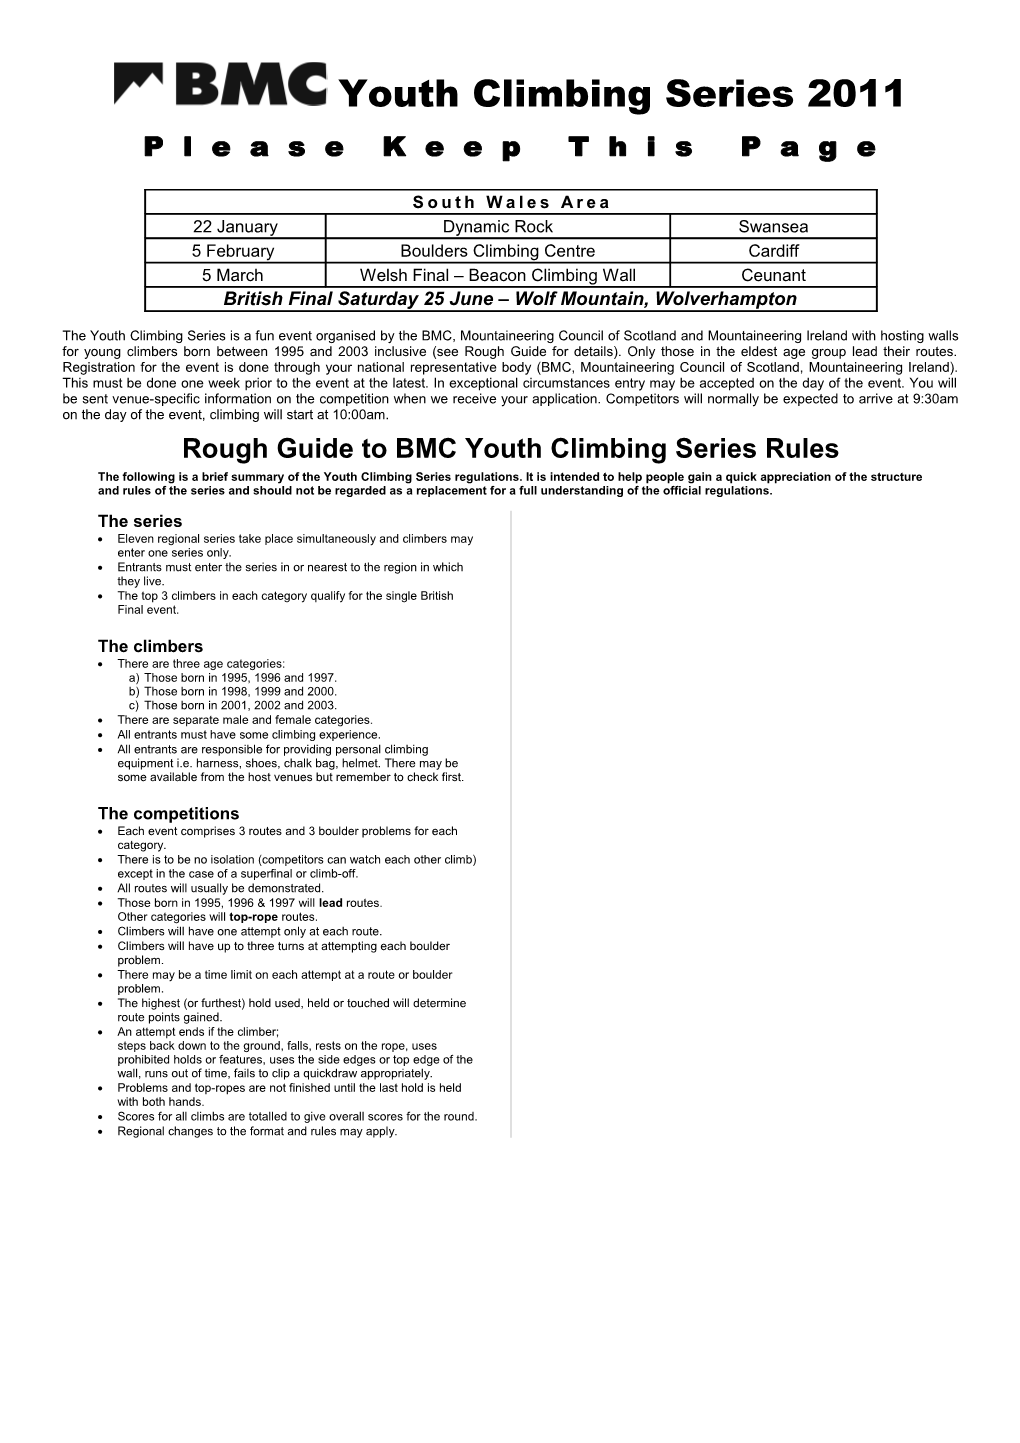 Rough Guide to BMC Youth Climbing Series Rules